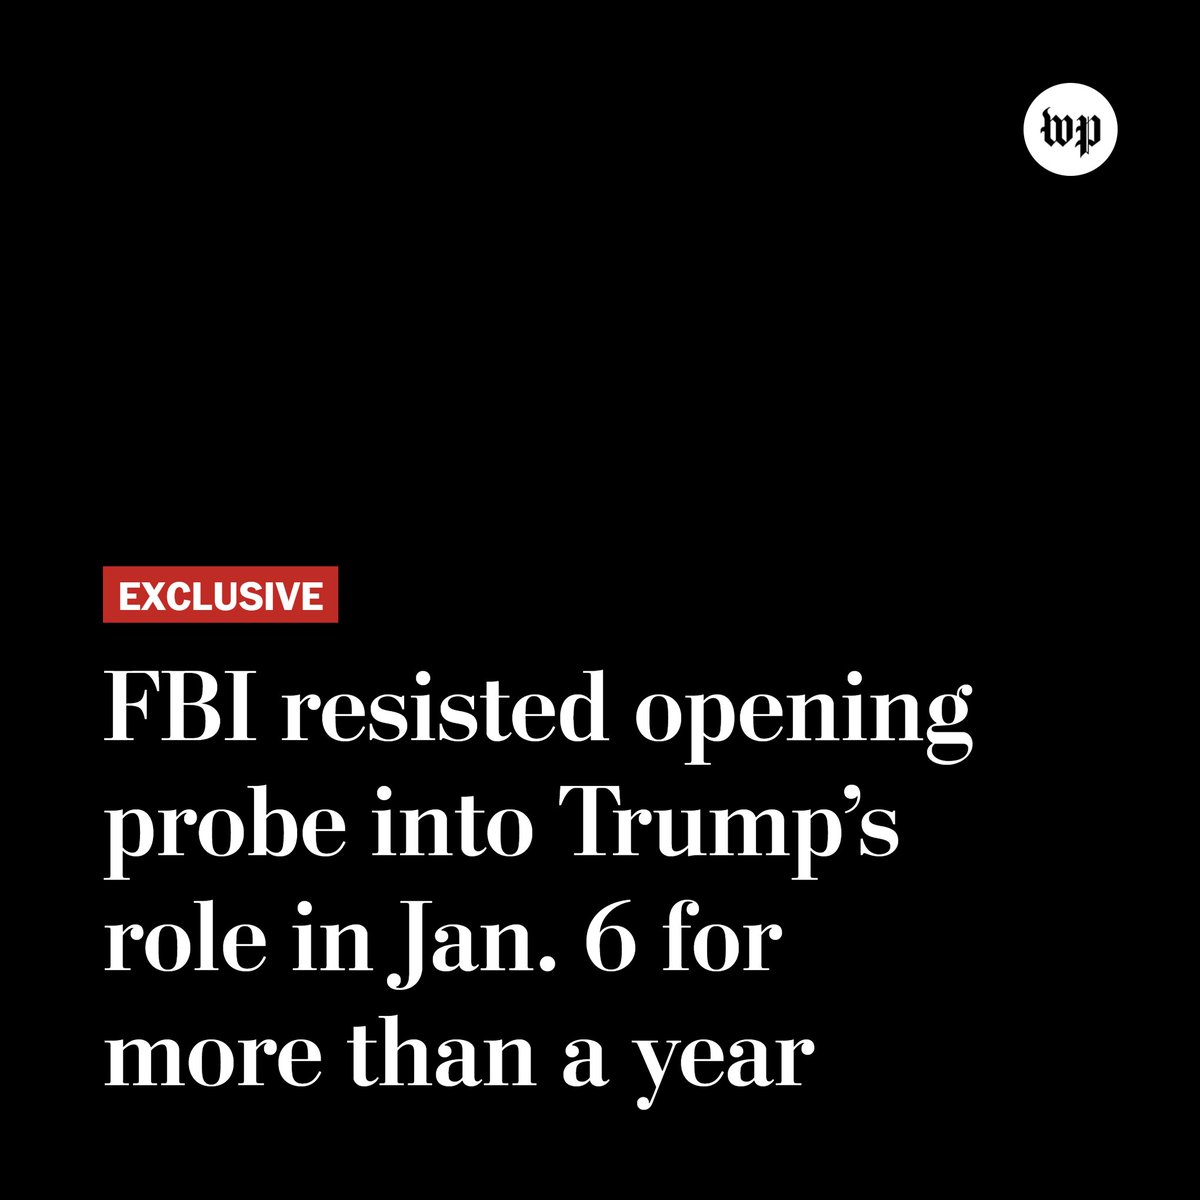 Exclusive: A Washington Post investigation found that more than a year would pass before prosecutors and FBI agents jointly embarked on a formal probe of actions directed from the White House to try to steal the election. 

Even then, the FBI stopped short of identifying the…